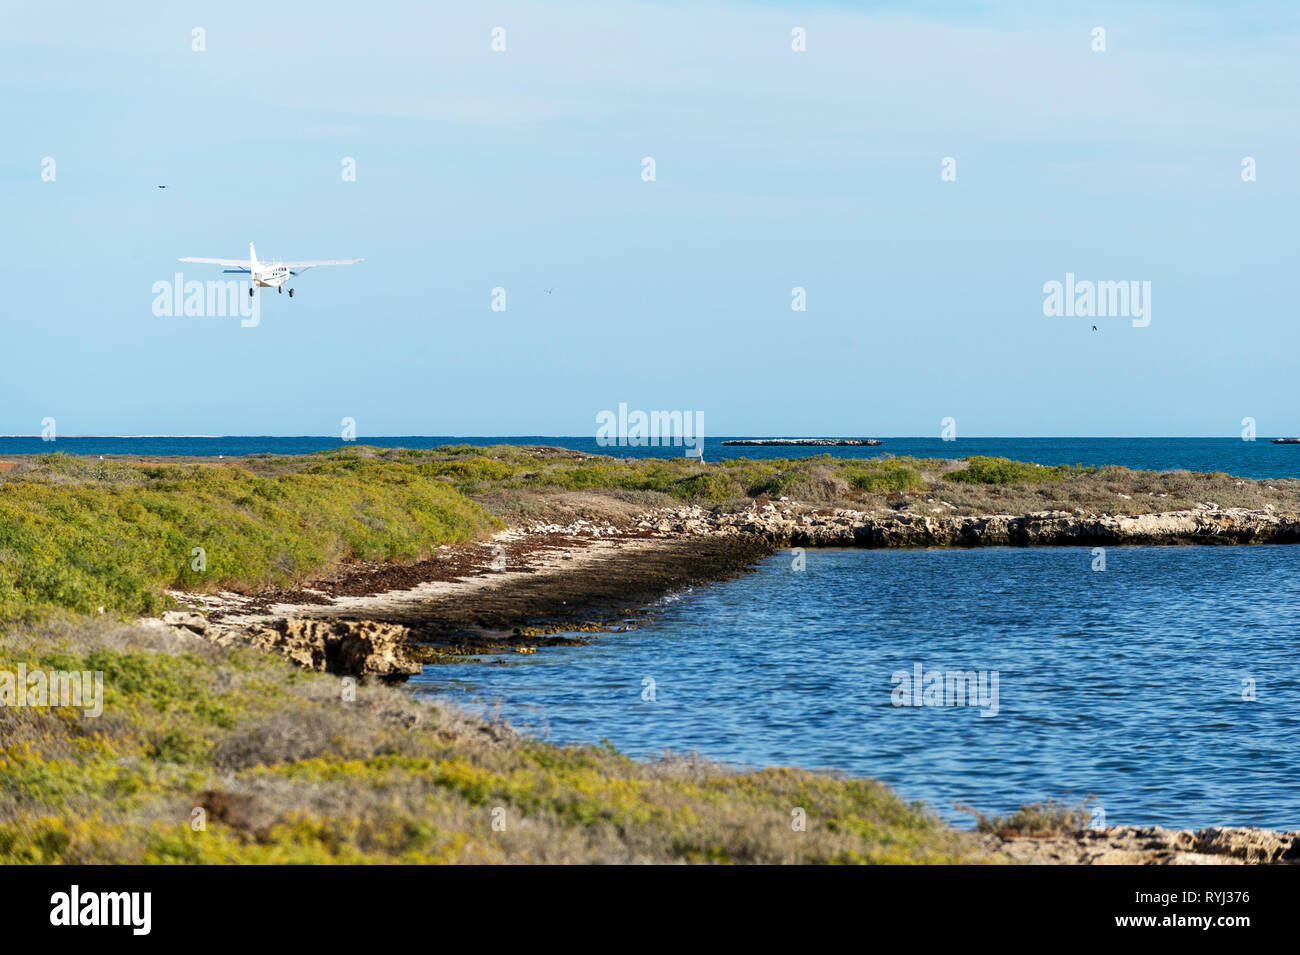 The airstrip on Big Rat Island, Houtman Abrolhos. The Houtman Abrolhos islands lie 60 kilometres off the coast of Geraldton in Western Australia. Ther Stock Photo